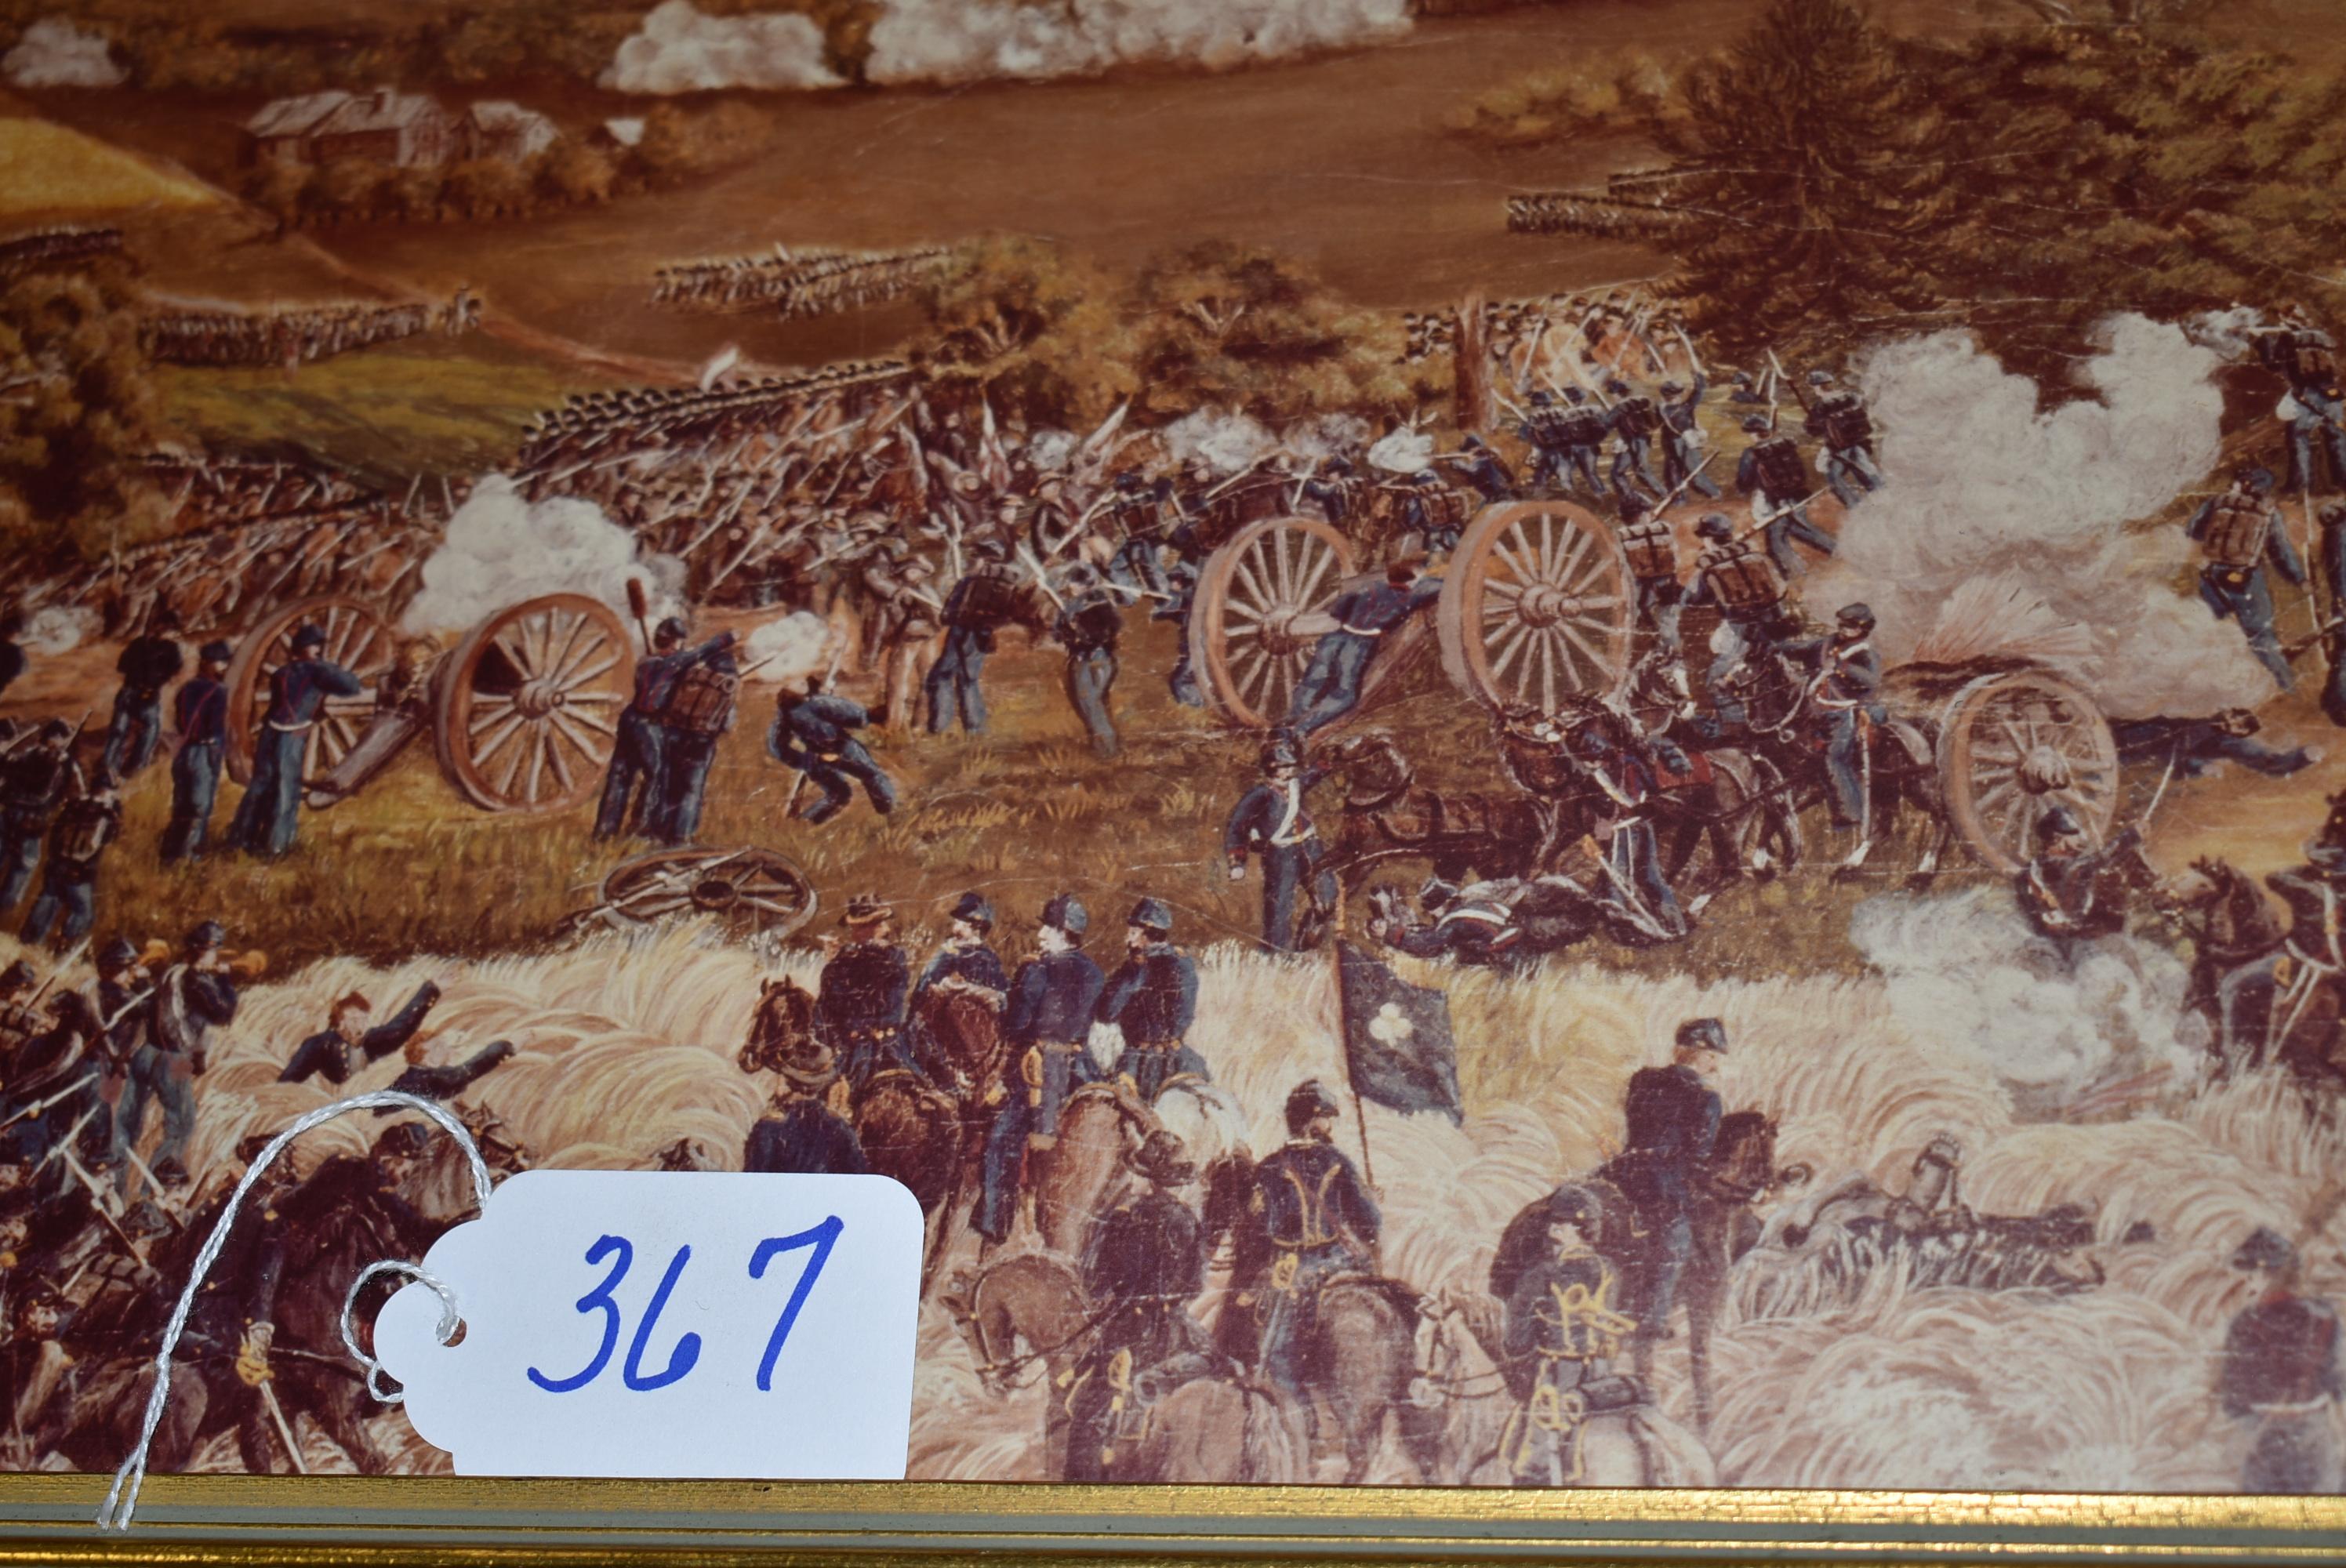 Print of painting of battle, probably Pickett's Charge at Gettysburg